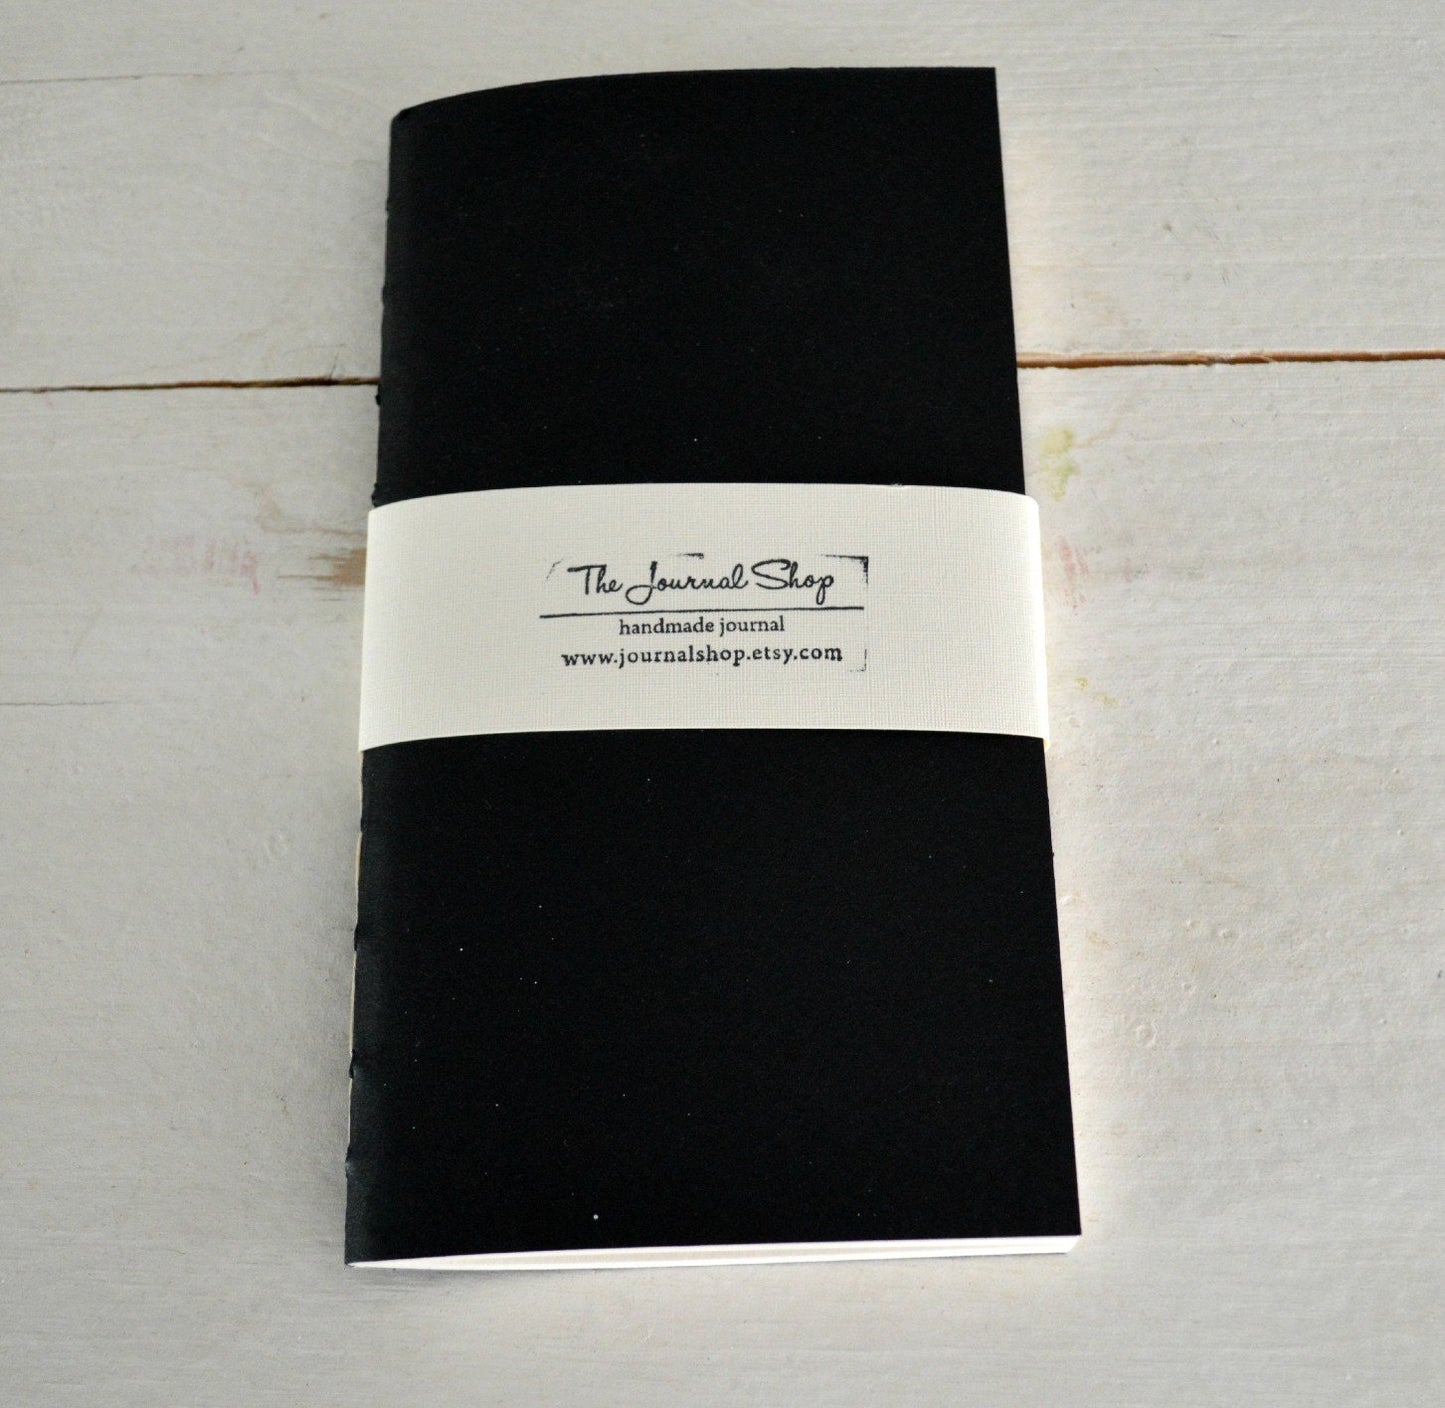 Black Watercolor Travelers Journal Sketchbook Notebook, TN insert with choice of supreme watercolor paper 300sm or 190 gsm, Artist Notebook